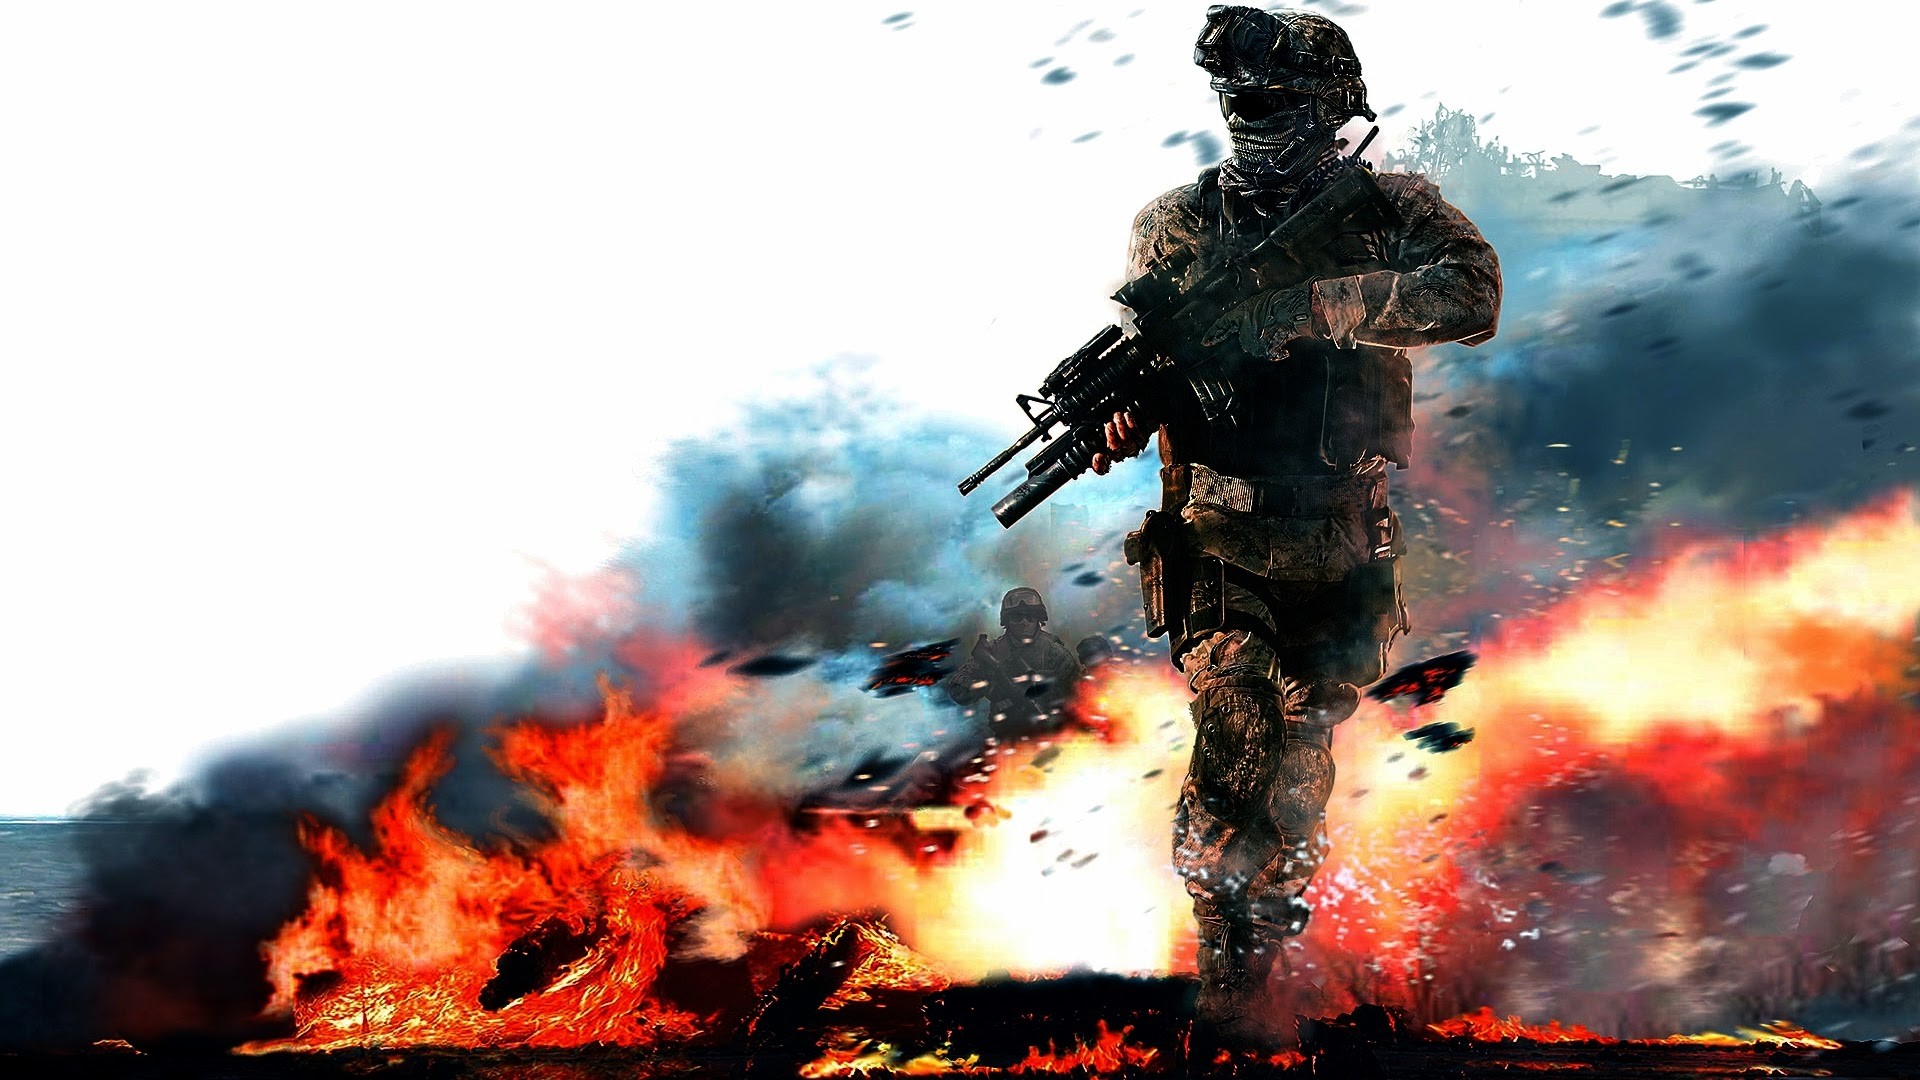 1920x1080 HD Best Call of Duty Video Game Wallpapers Full Size .